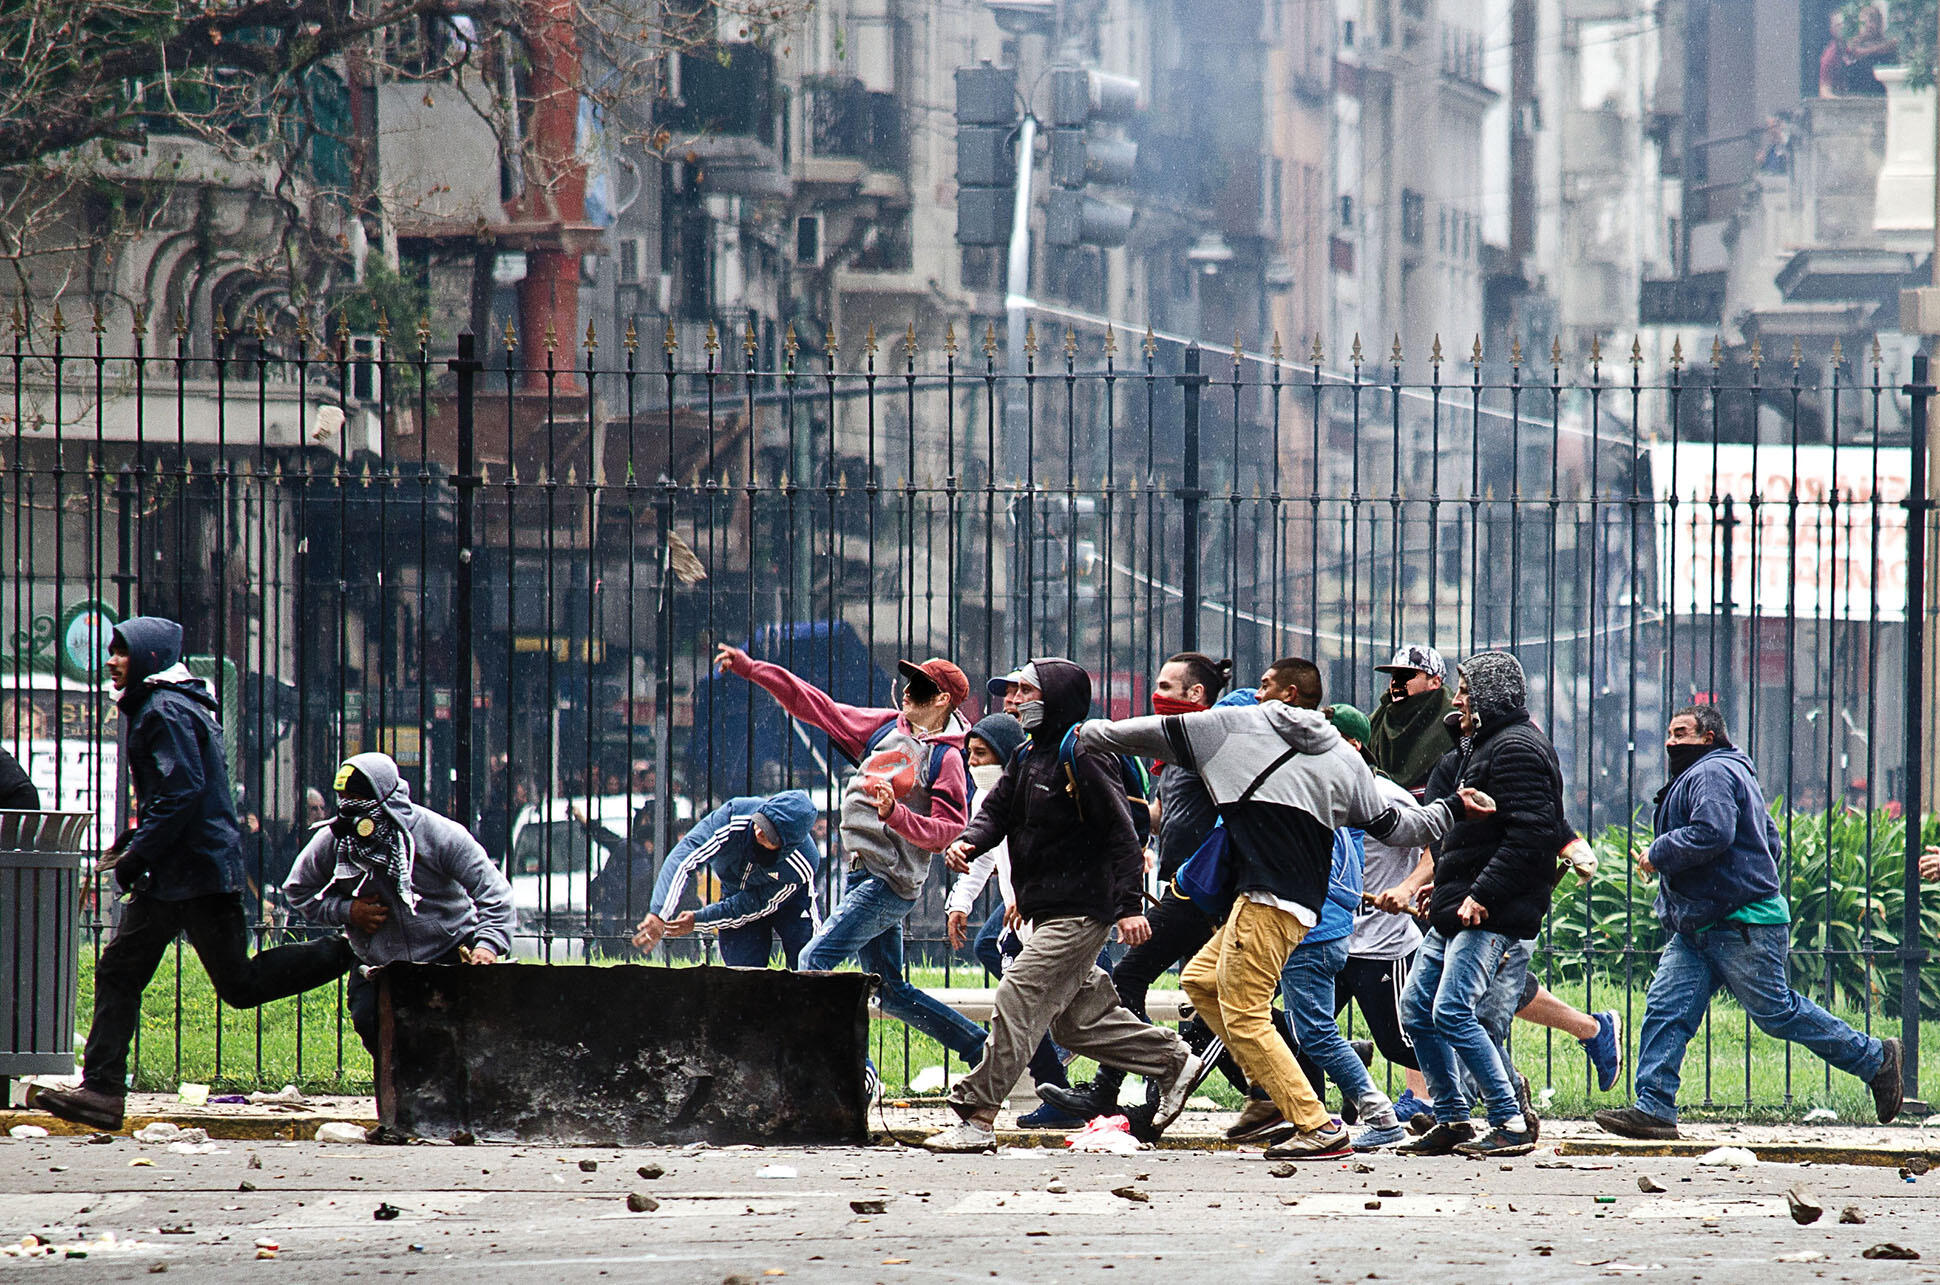  Protestors throw rocks during a protest against the IMF in downtown Buenos Aires, October 2018. (Photo by Santiago Sito.)